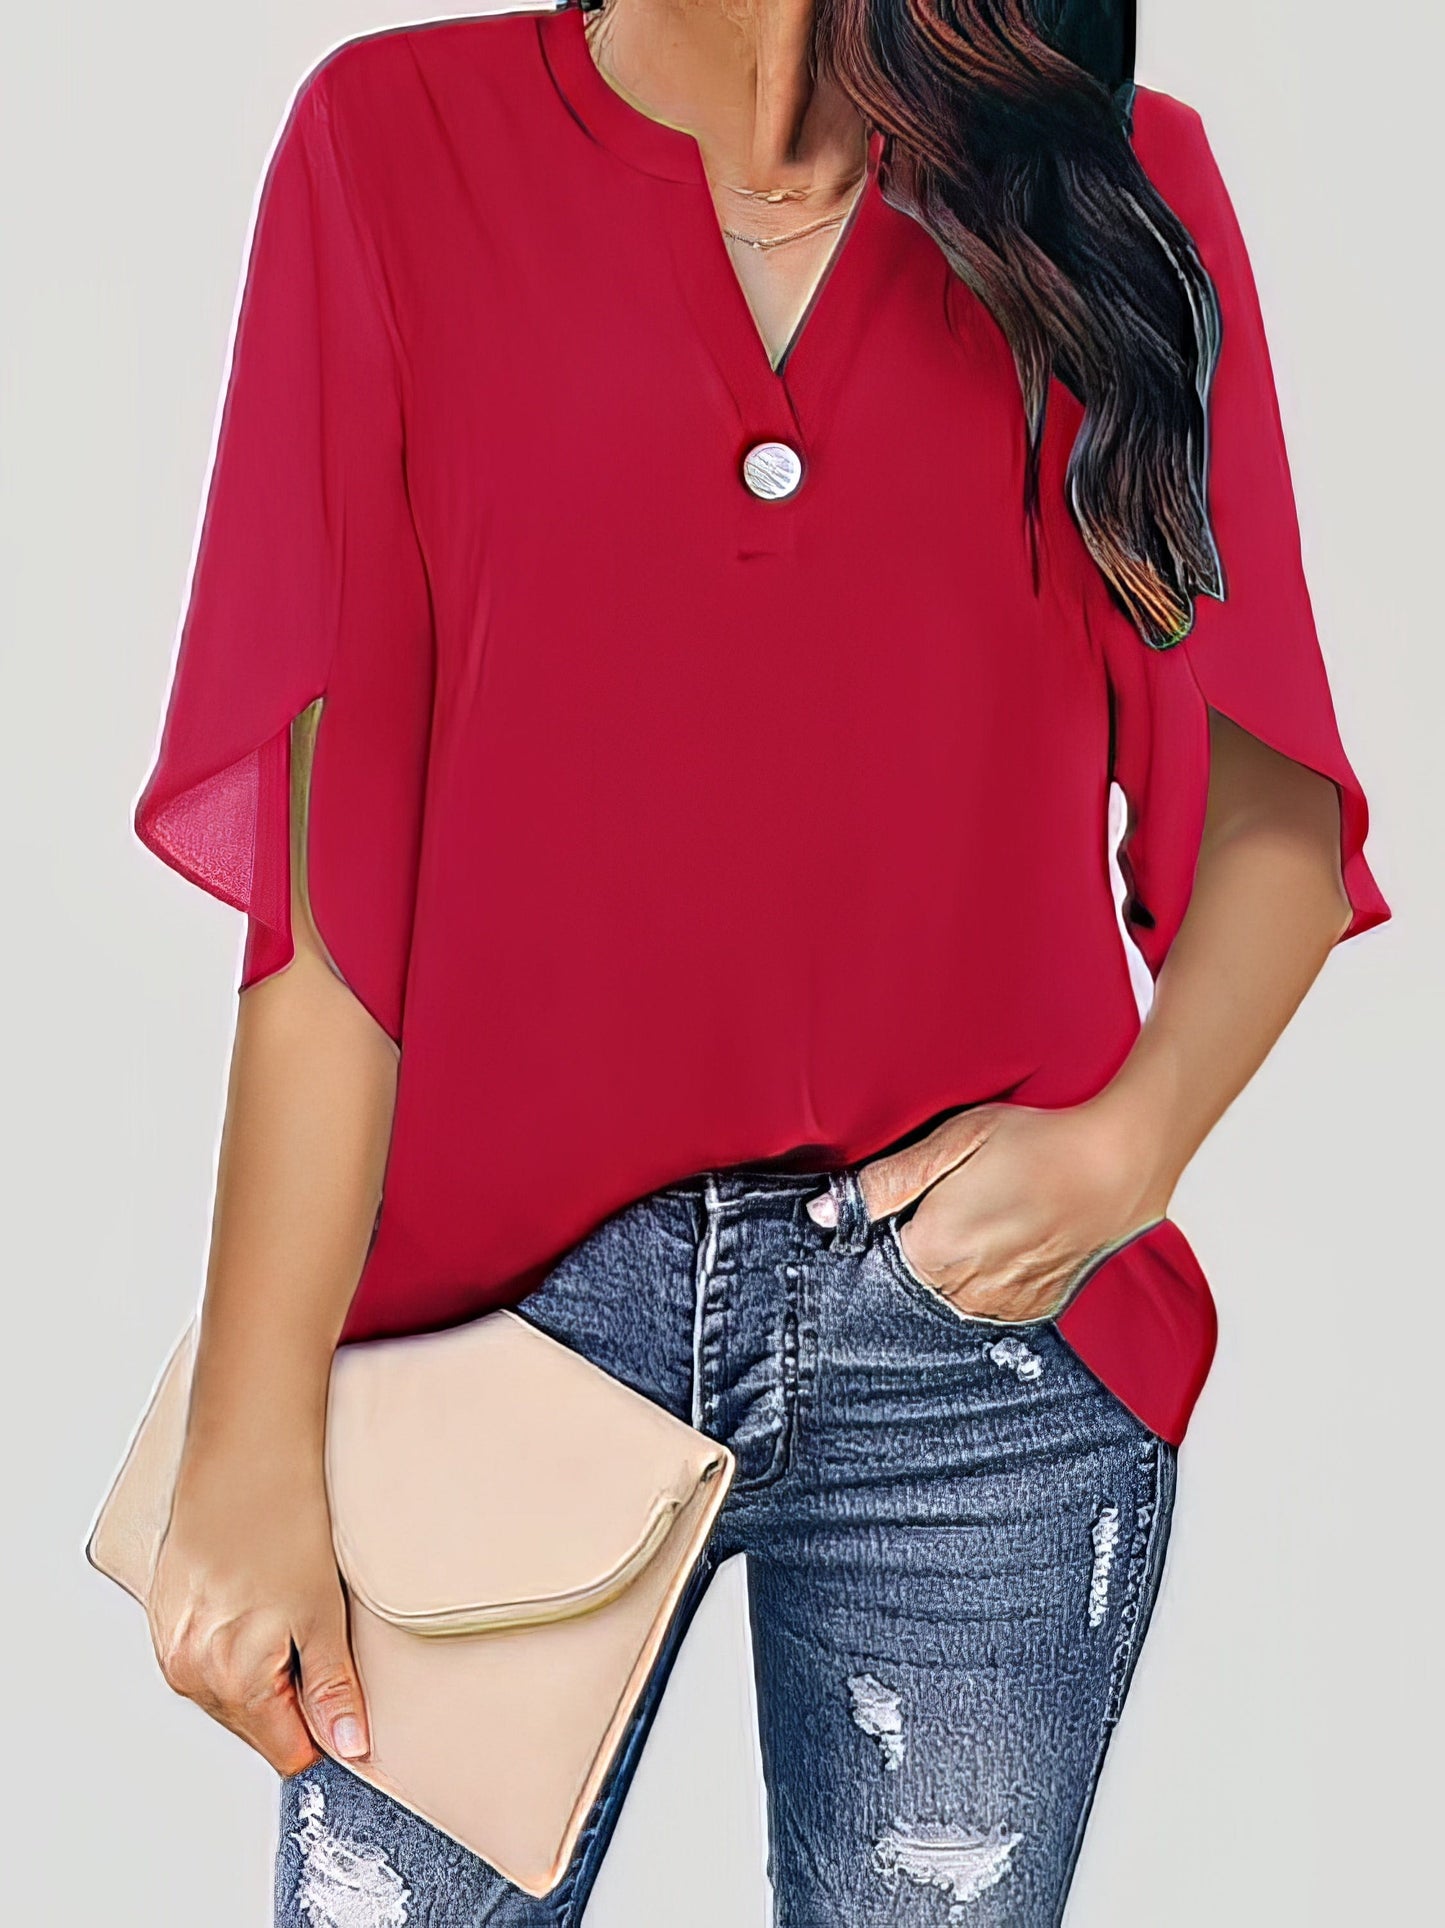 Casual V-Neck Short Sleeve Chiffon Blouse BLO2203251641REDS Red / 2 (S)